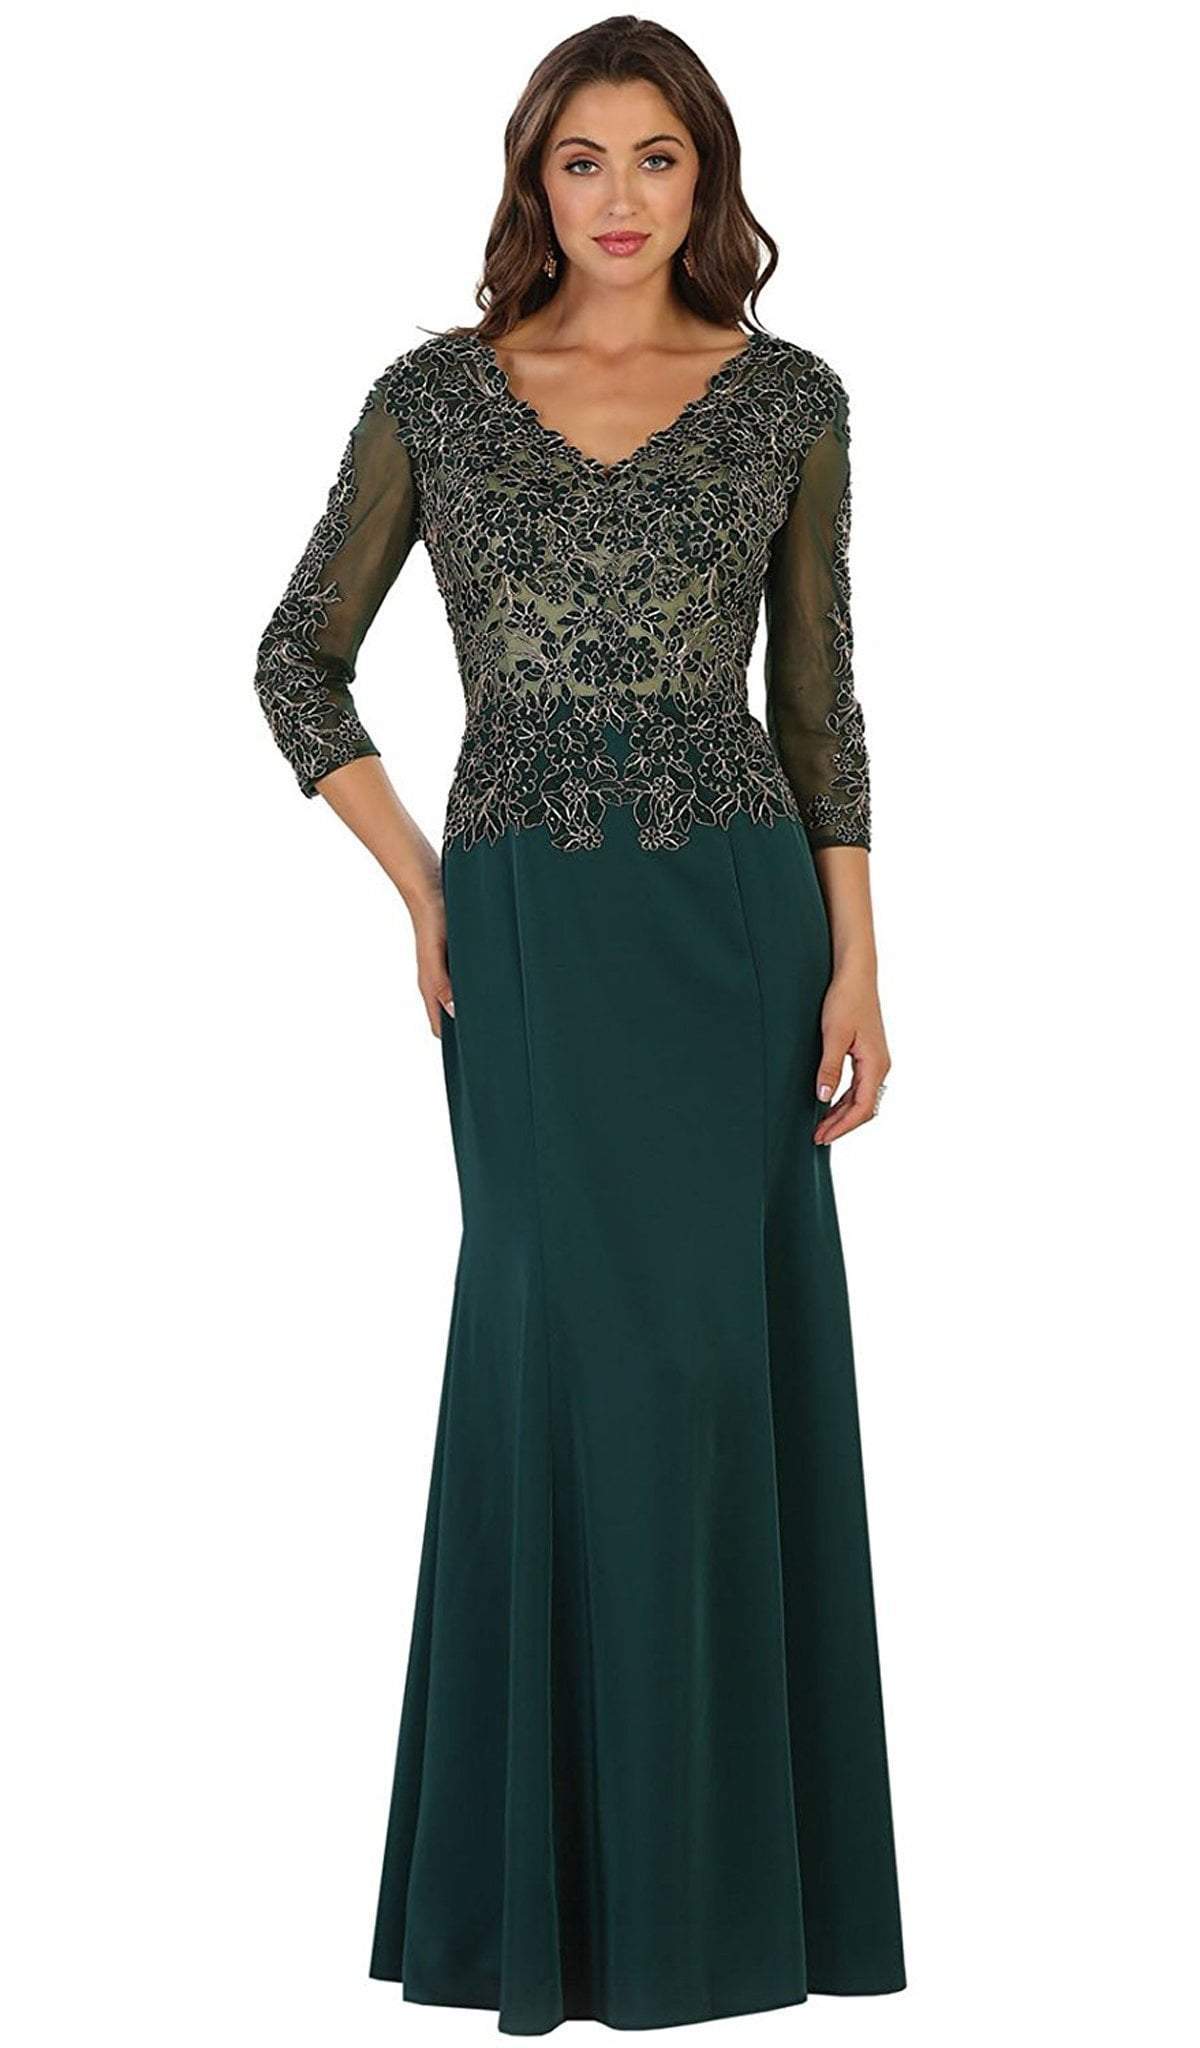 May Queen - MQ1505 Quarter Length Sleeve Lace Sheath Evening Dress Mother of the Bride Dresses M / Hunter-Green